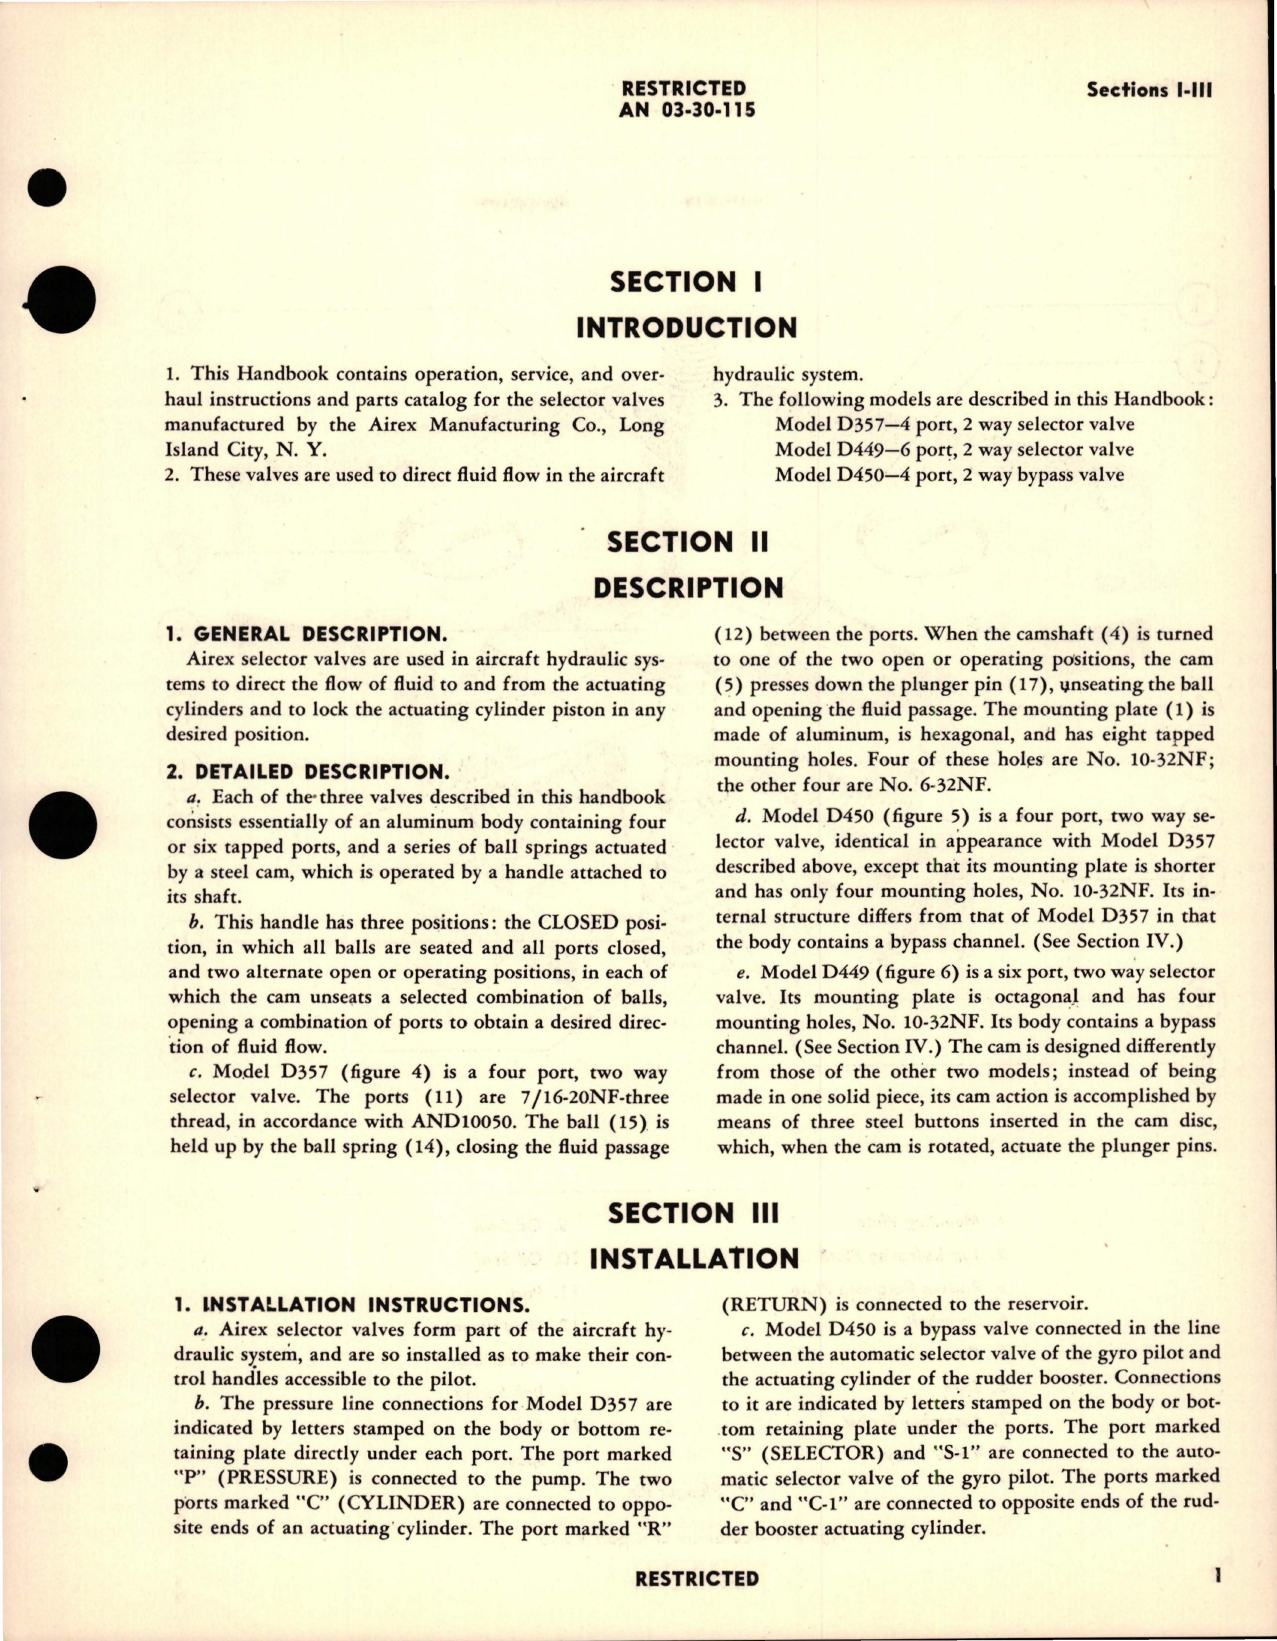 Sample page 7 from AirCorps Library document: Instructions with Parts Catalog for Hydraulic Selector Valves - Models D357, D449, and D450